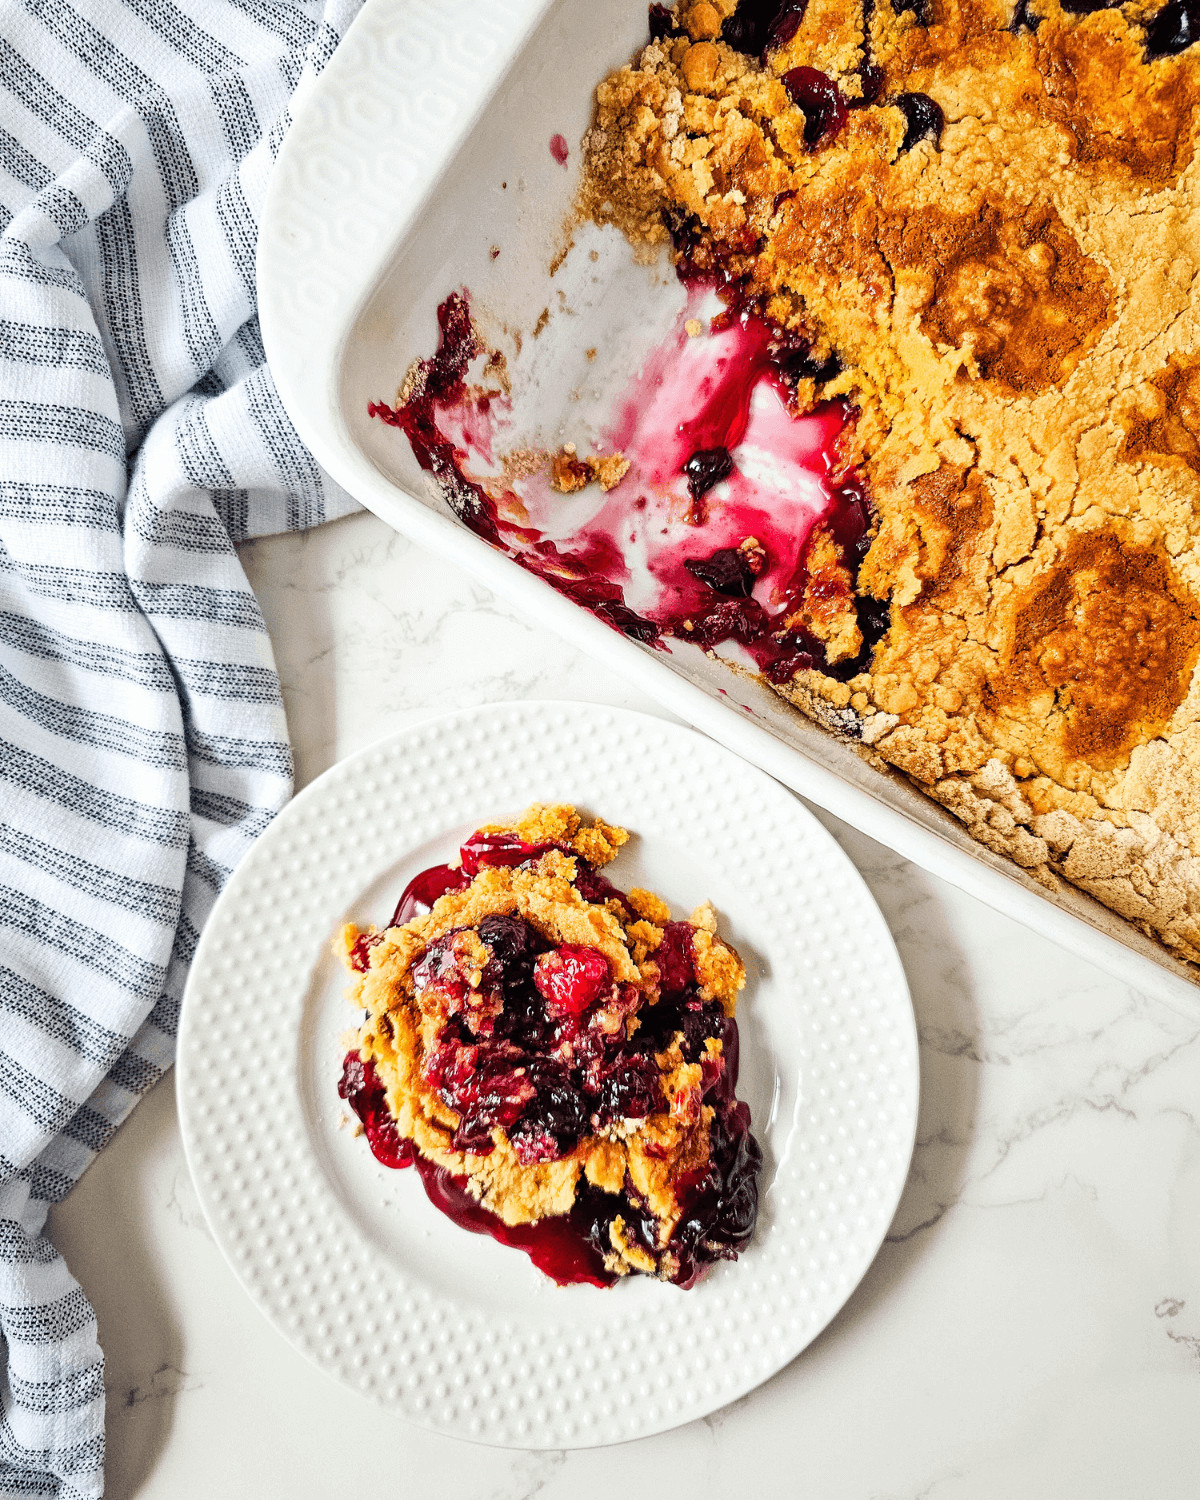 A top shot of the blueberry cherry dump cake.